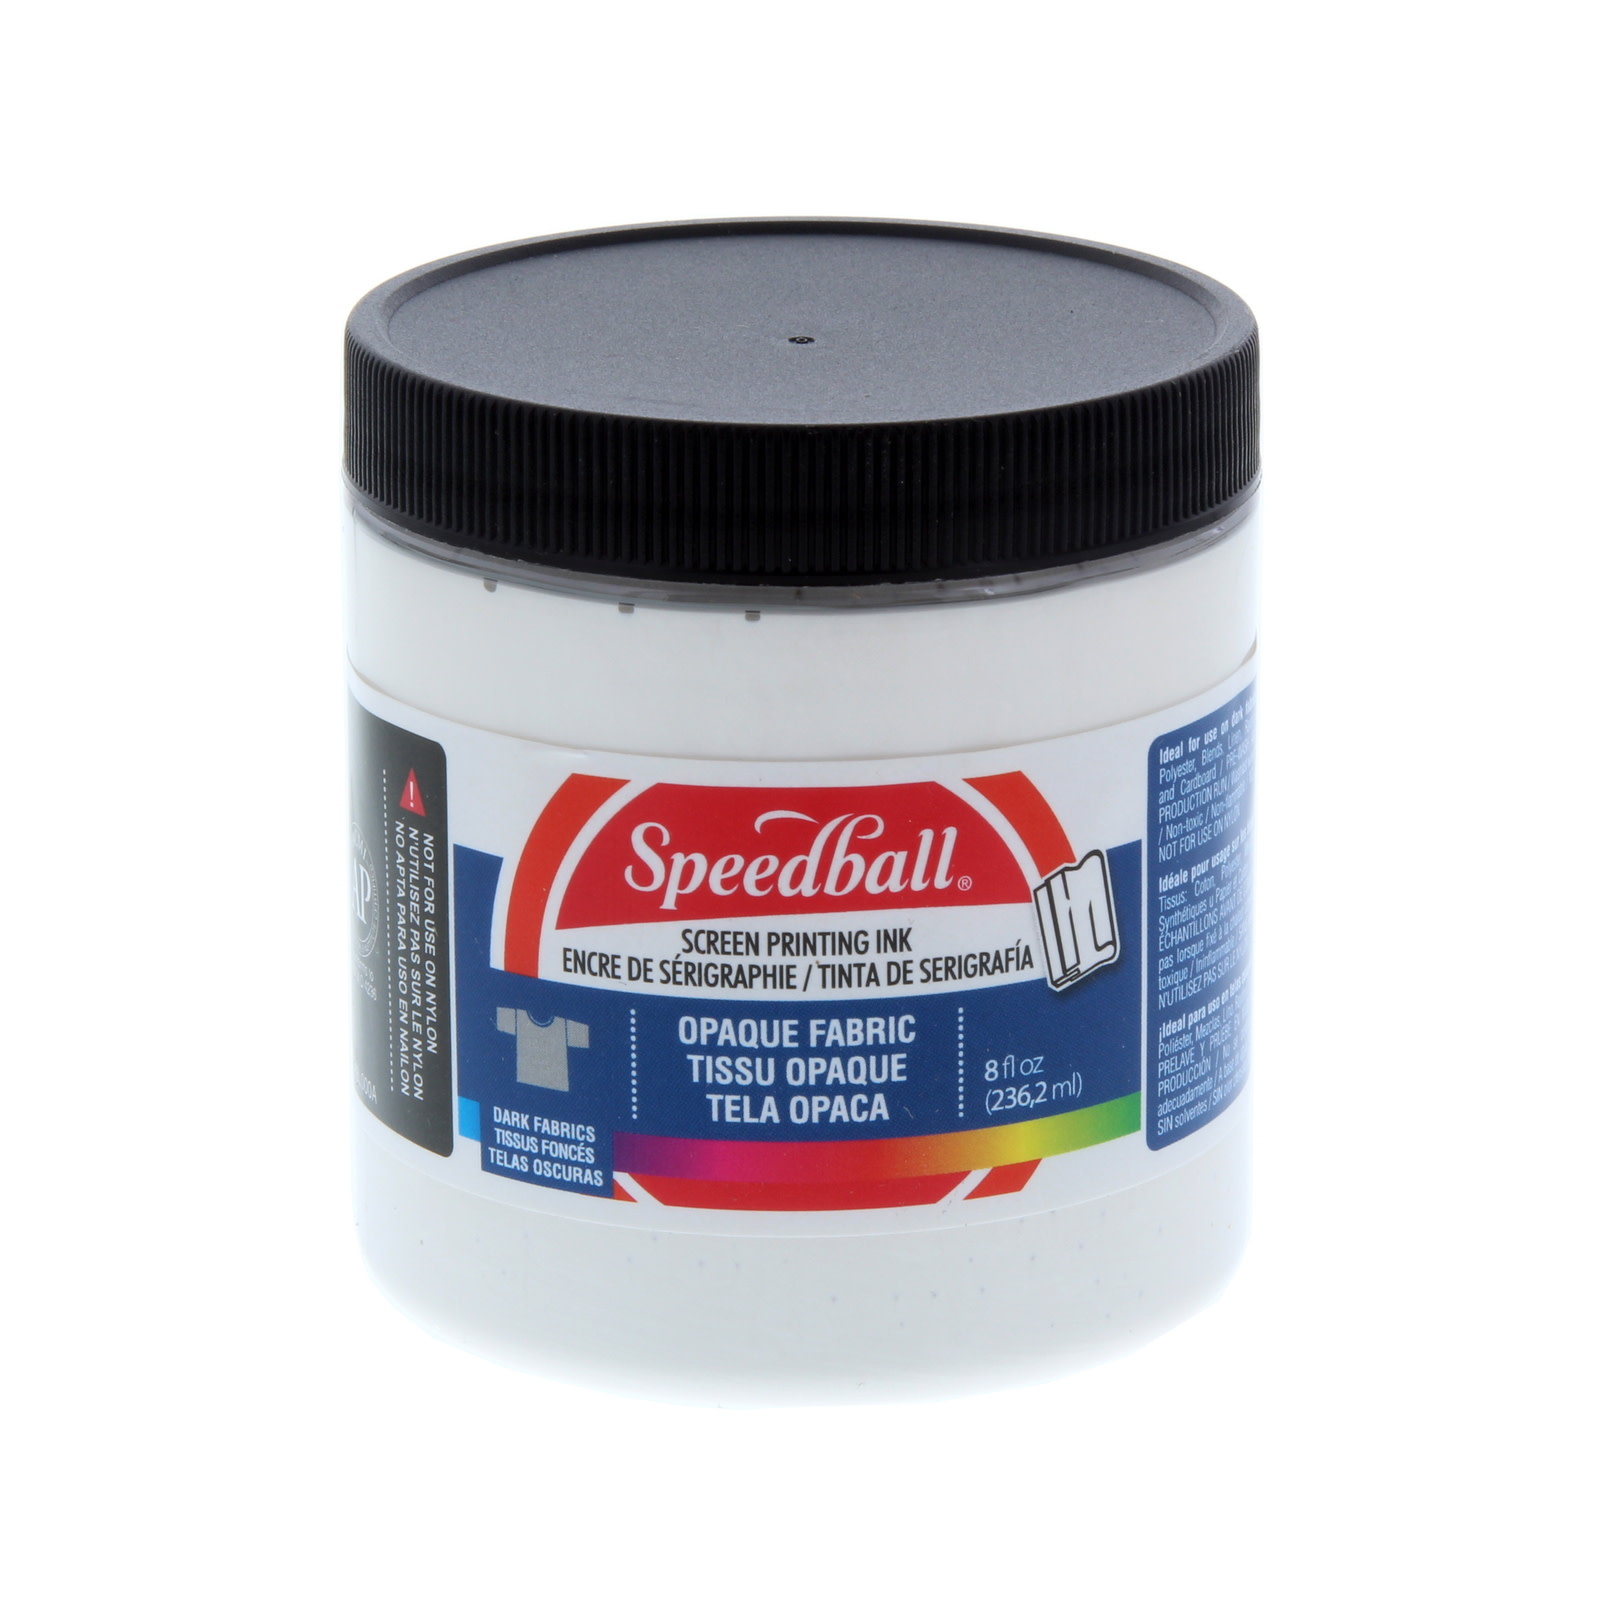 Speedball Opaque Fabric Screen Printing Ink, 8 oz. Jars, Pearly White